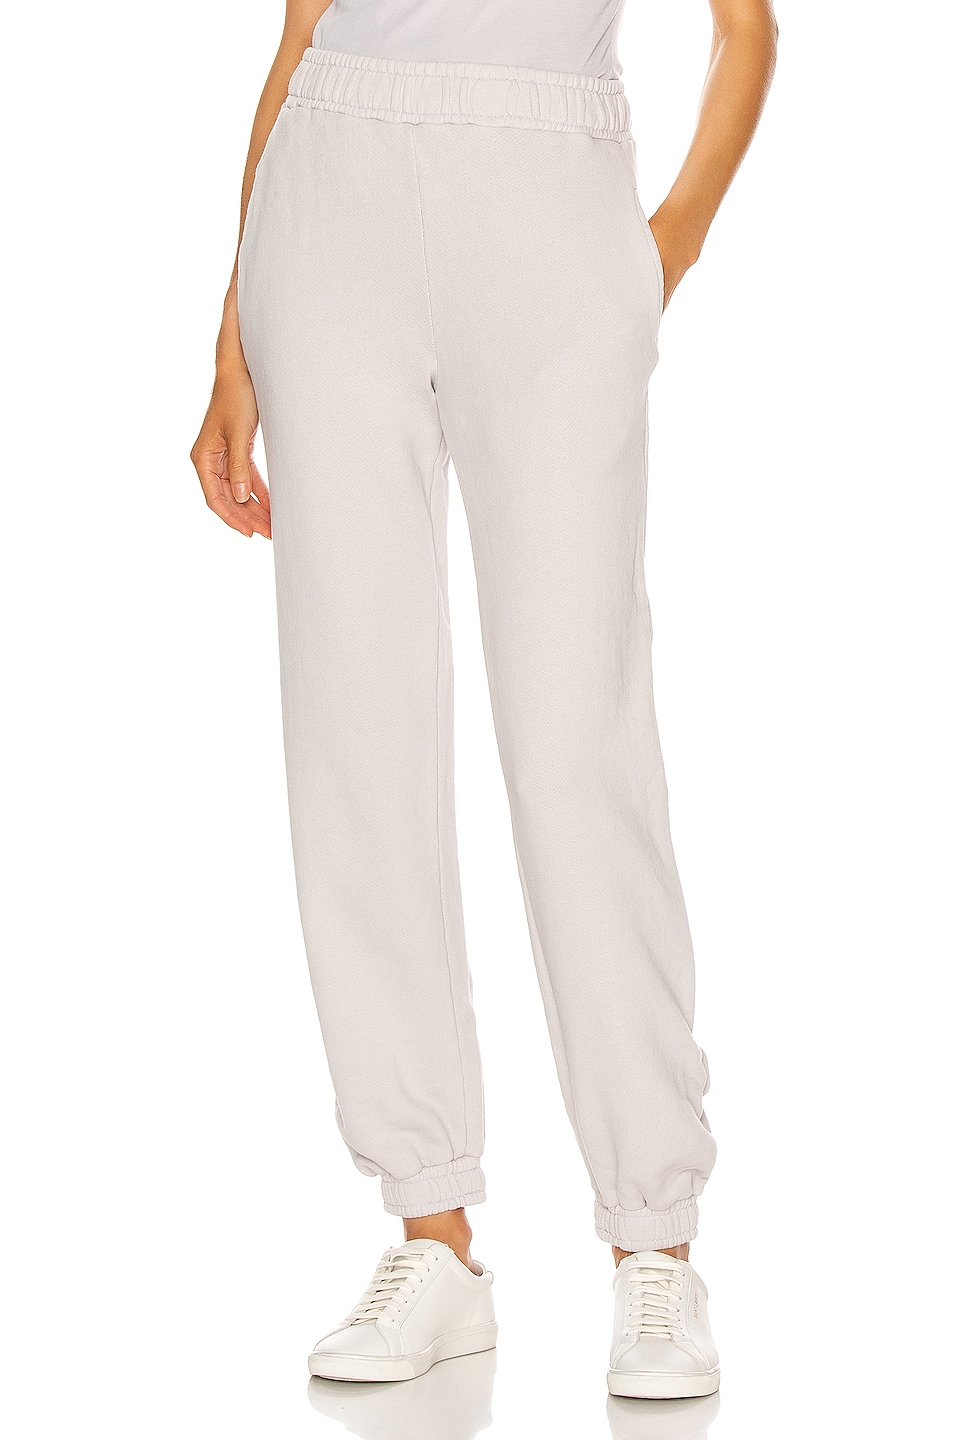 Image 1 of COTTON CITIZEN Brooklyn Sweatpant in Vintage White Stone